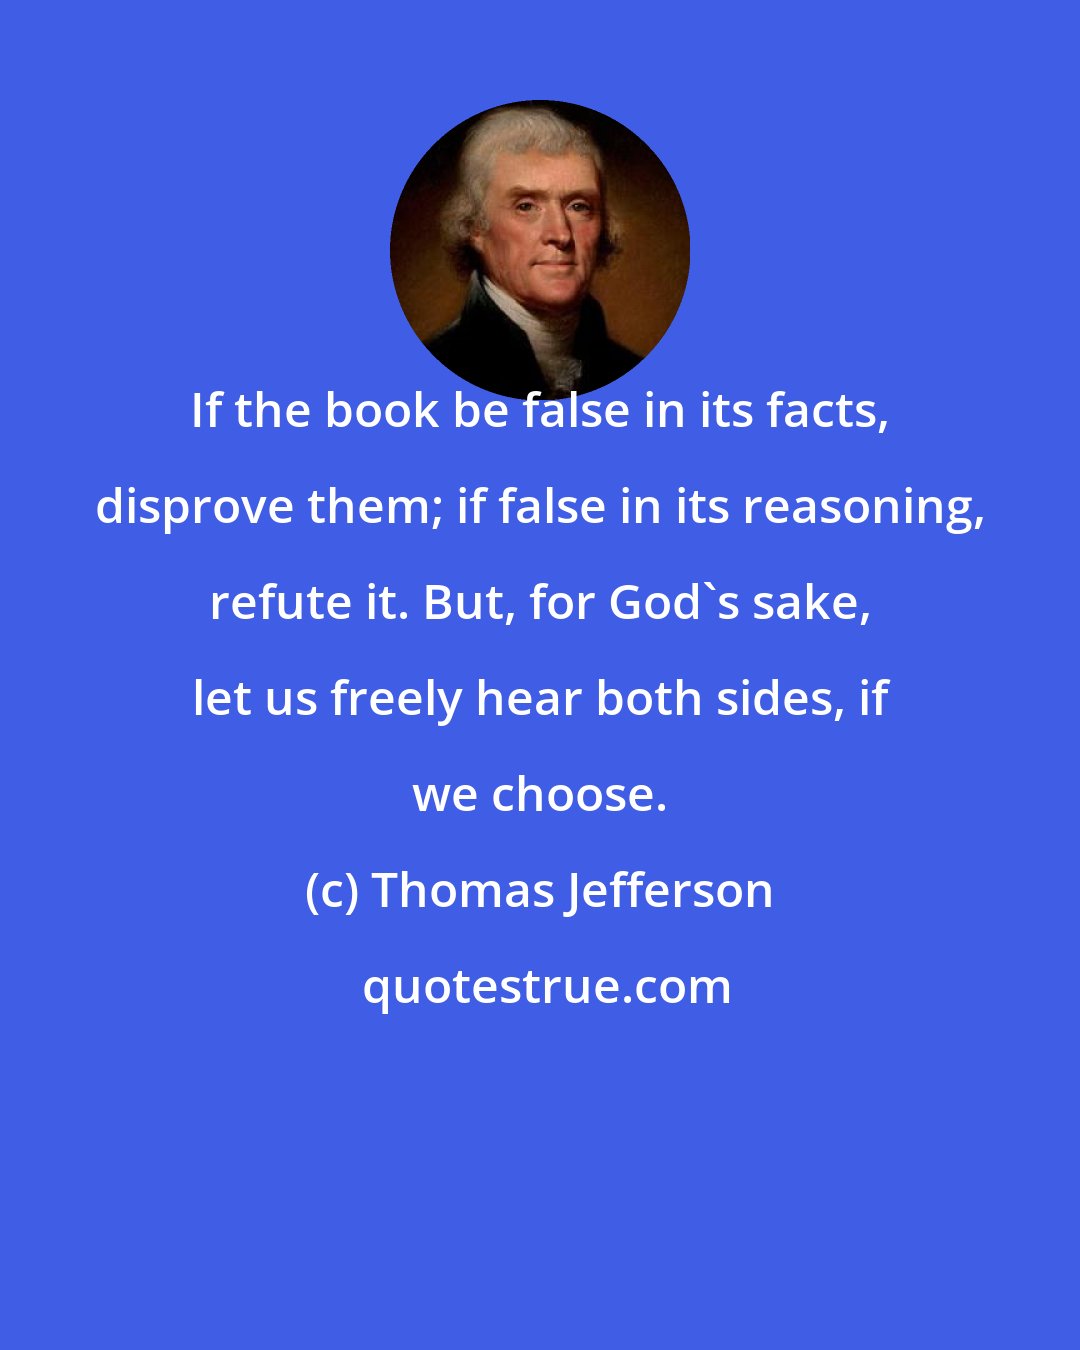 Thomas Jefferson: If the book be false in its facts, disprove them; if false in its reasoning, refute it. But, for God's sake, let us freely hear both sides, if we choose.